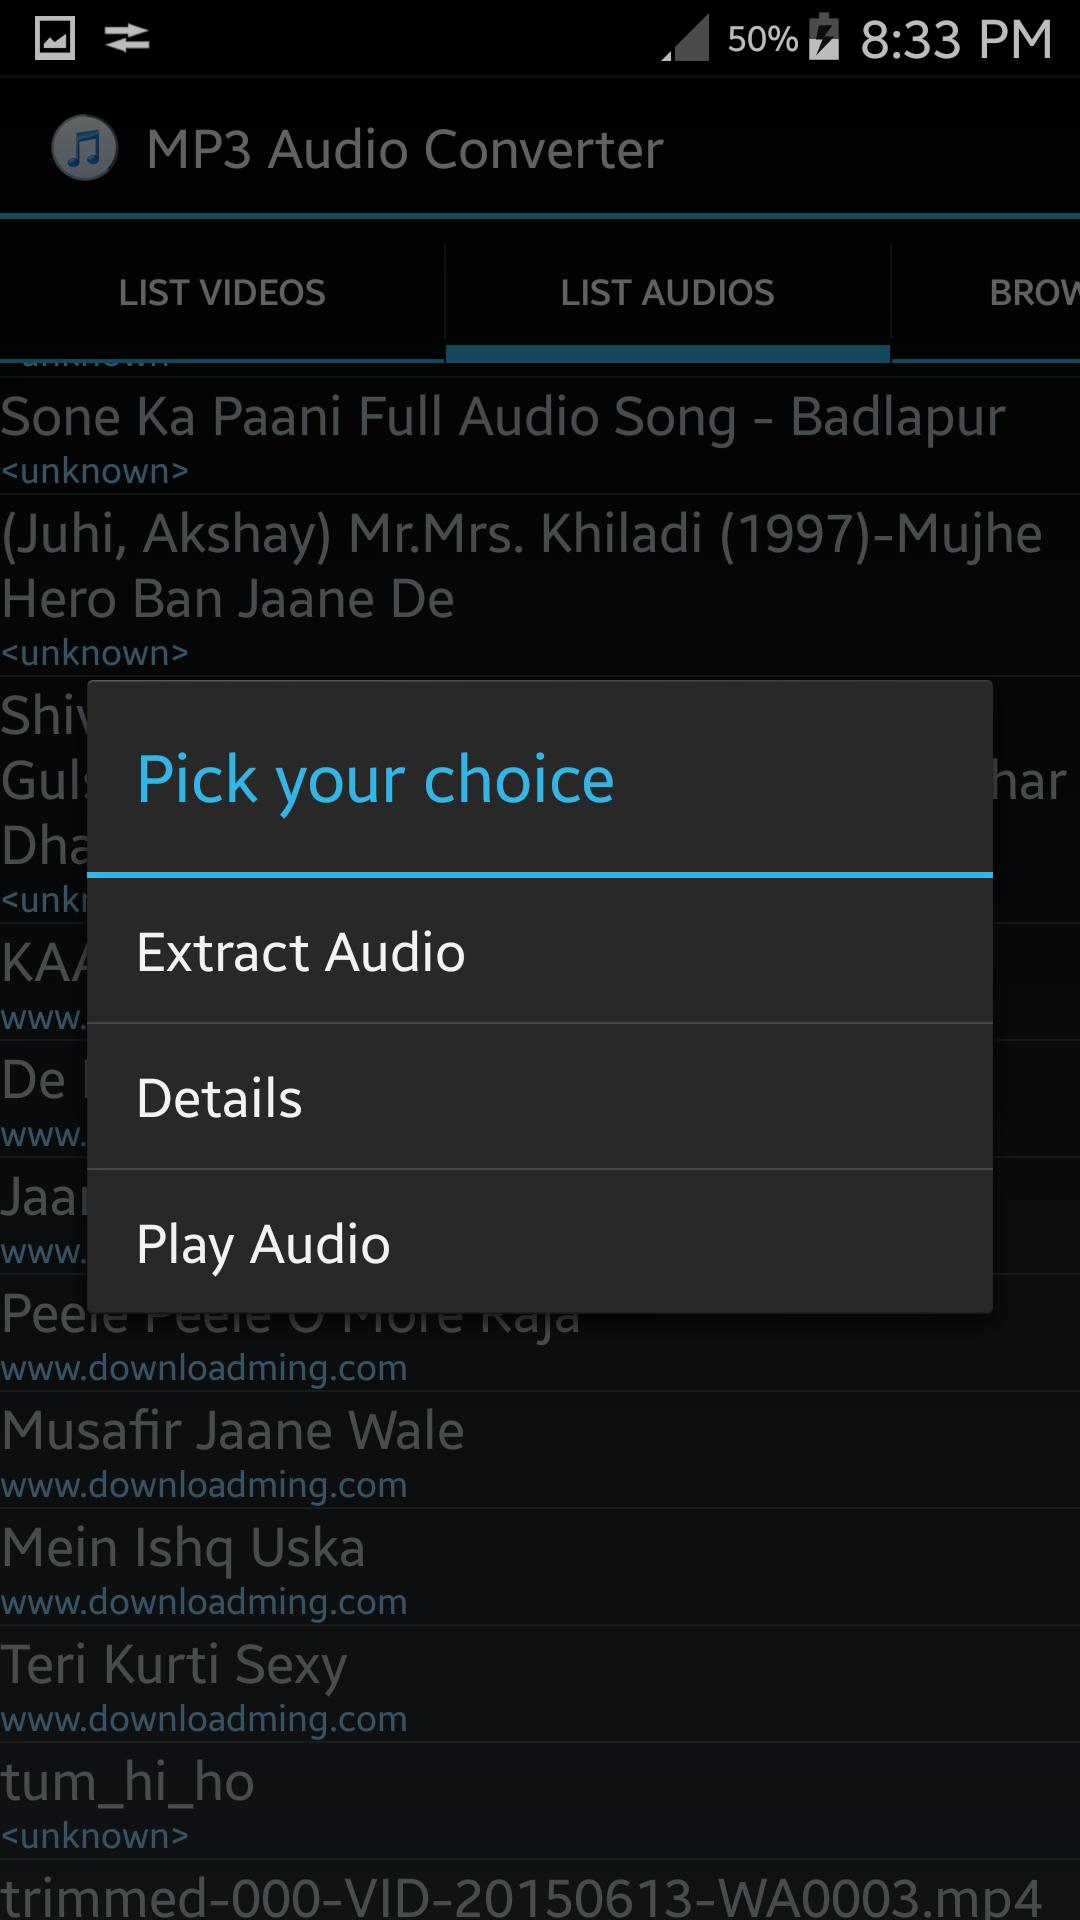 FLAC Audio Converter for Android - APK Download